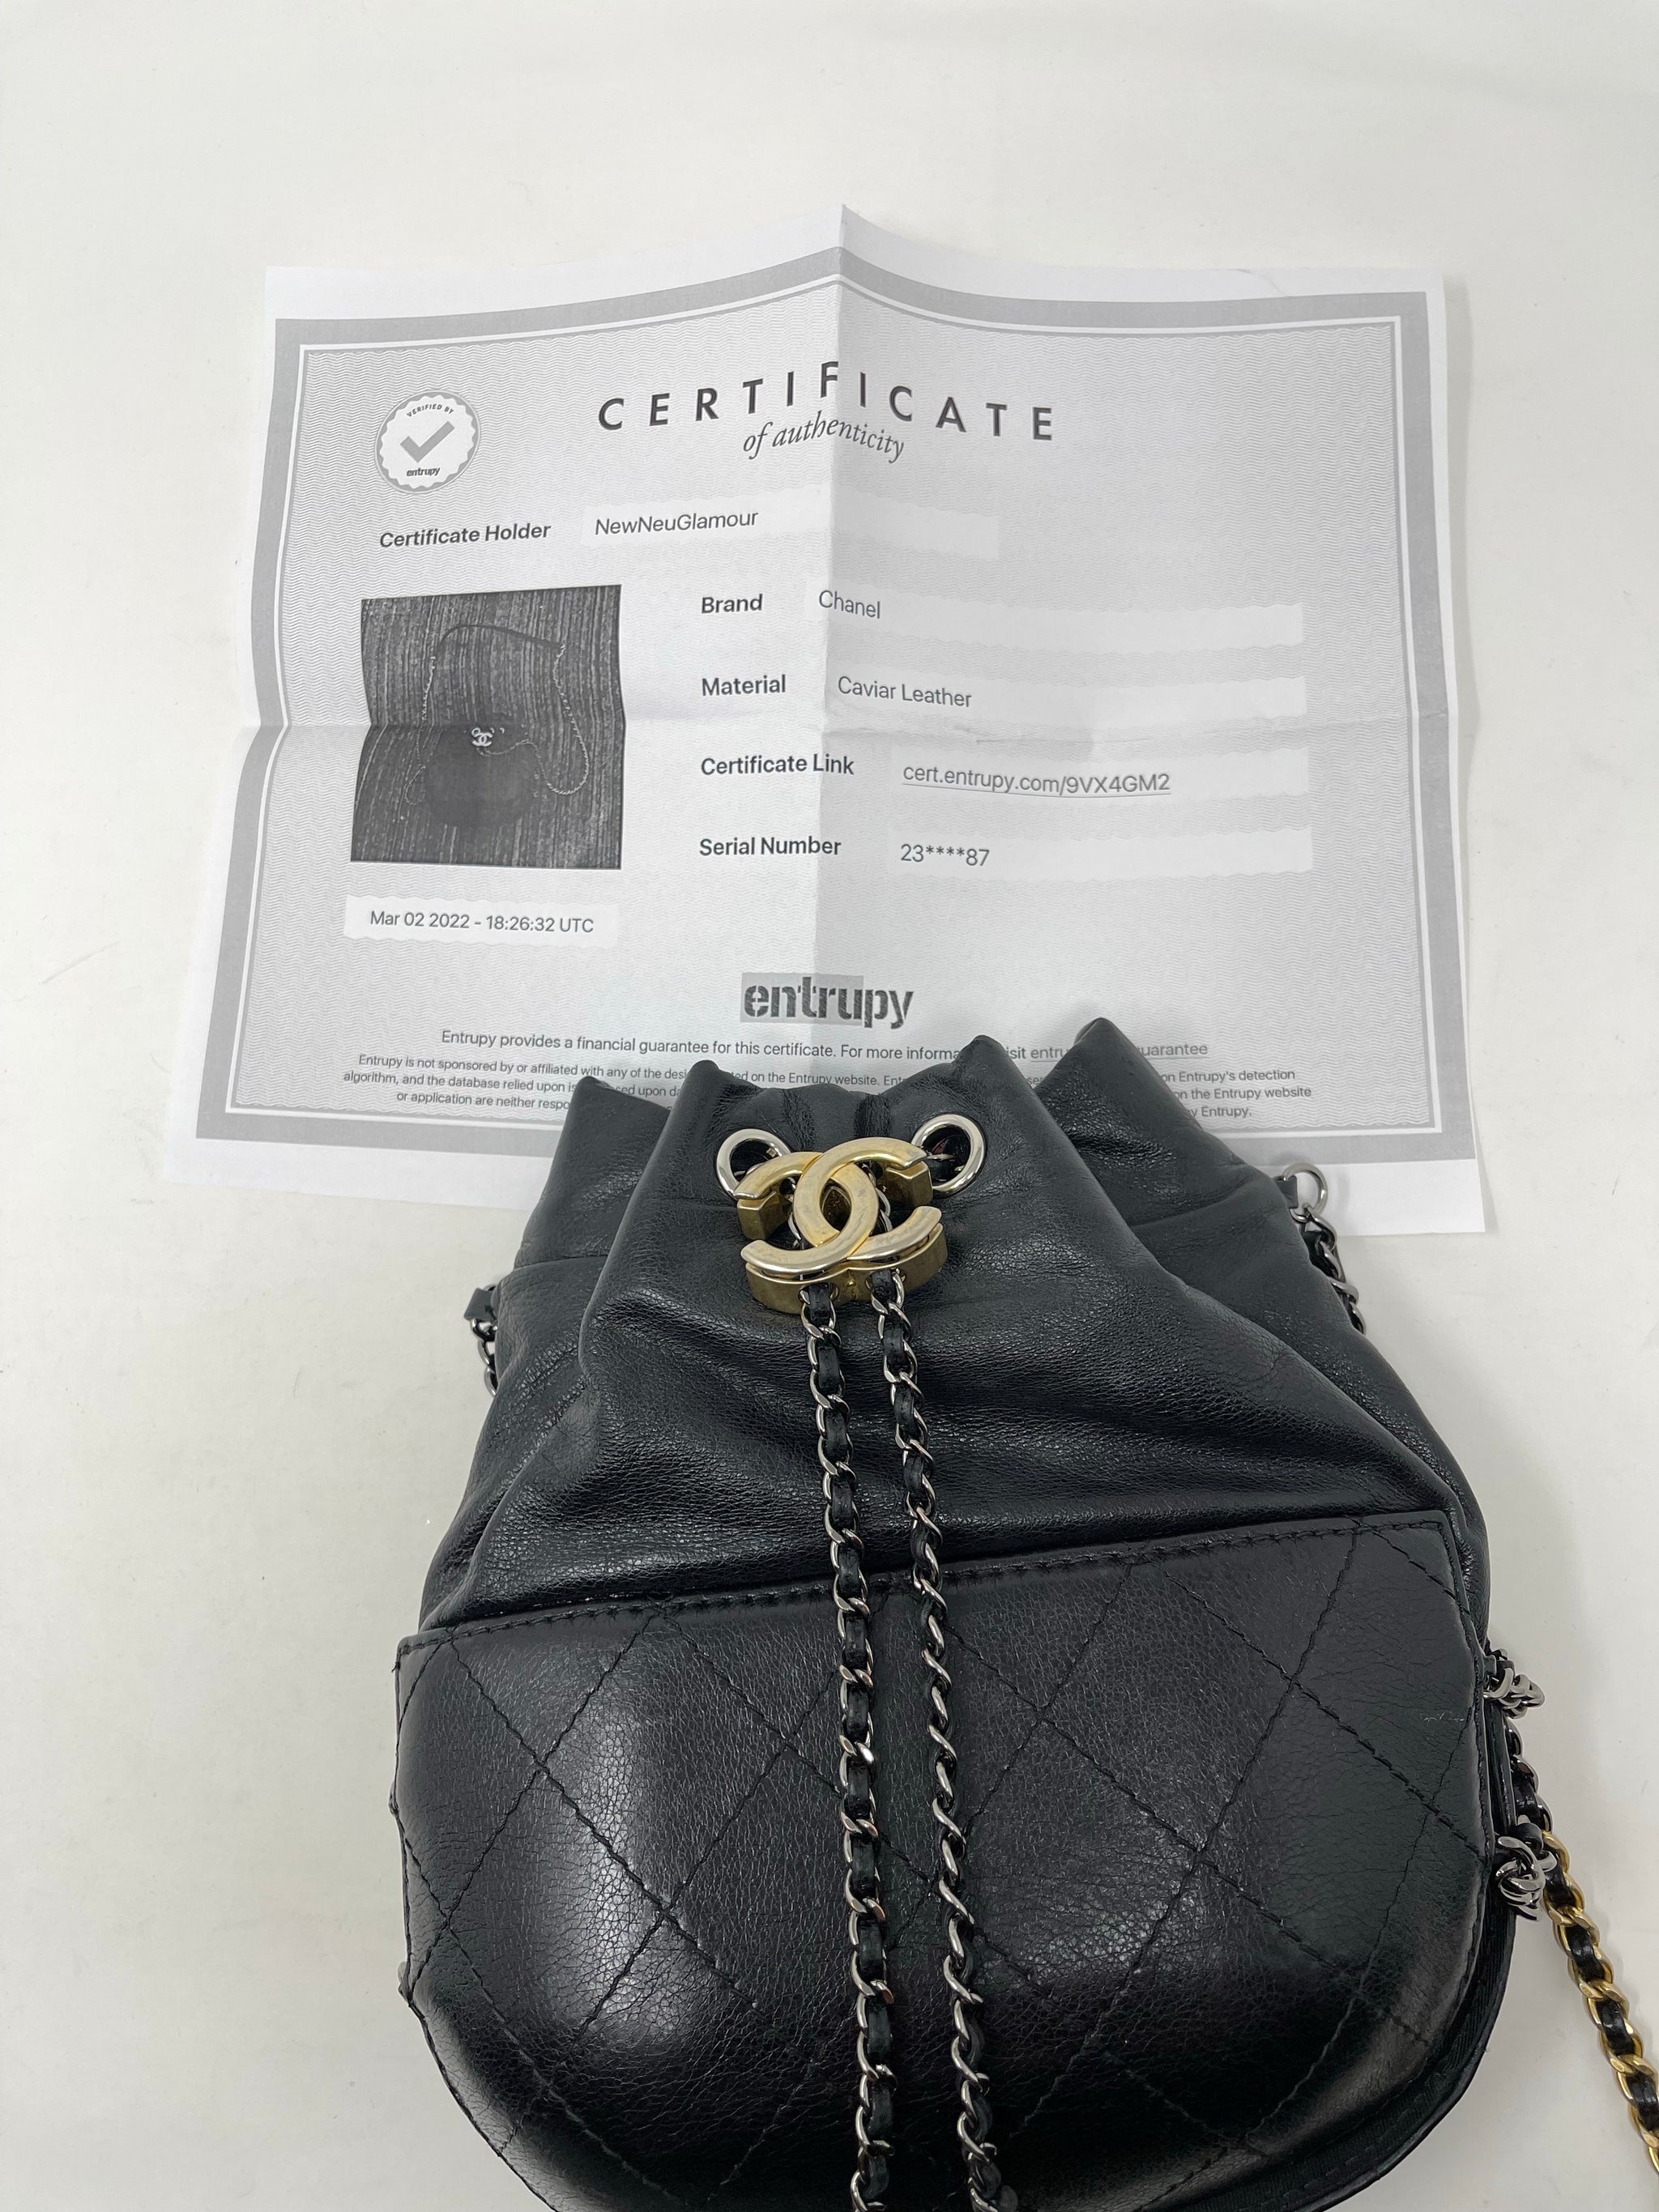 Chanel White/Black Quilted Leather Gabrielle Bucket Bag at 1stDibs  chanel gabrielle  bucket bag, chanel white bucket bag, chanel gabrielle bucket